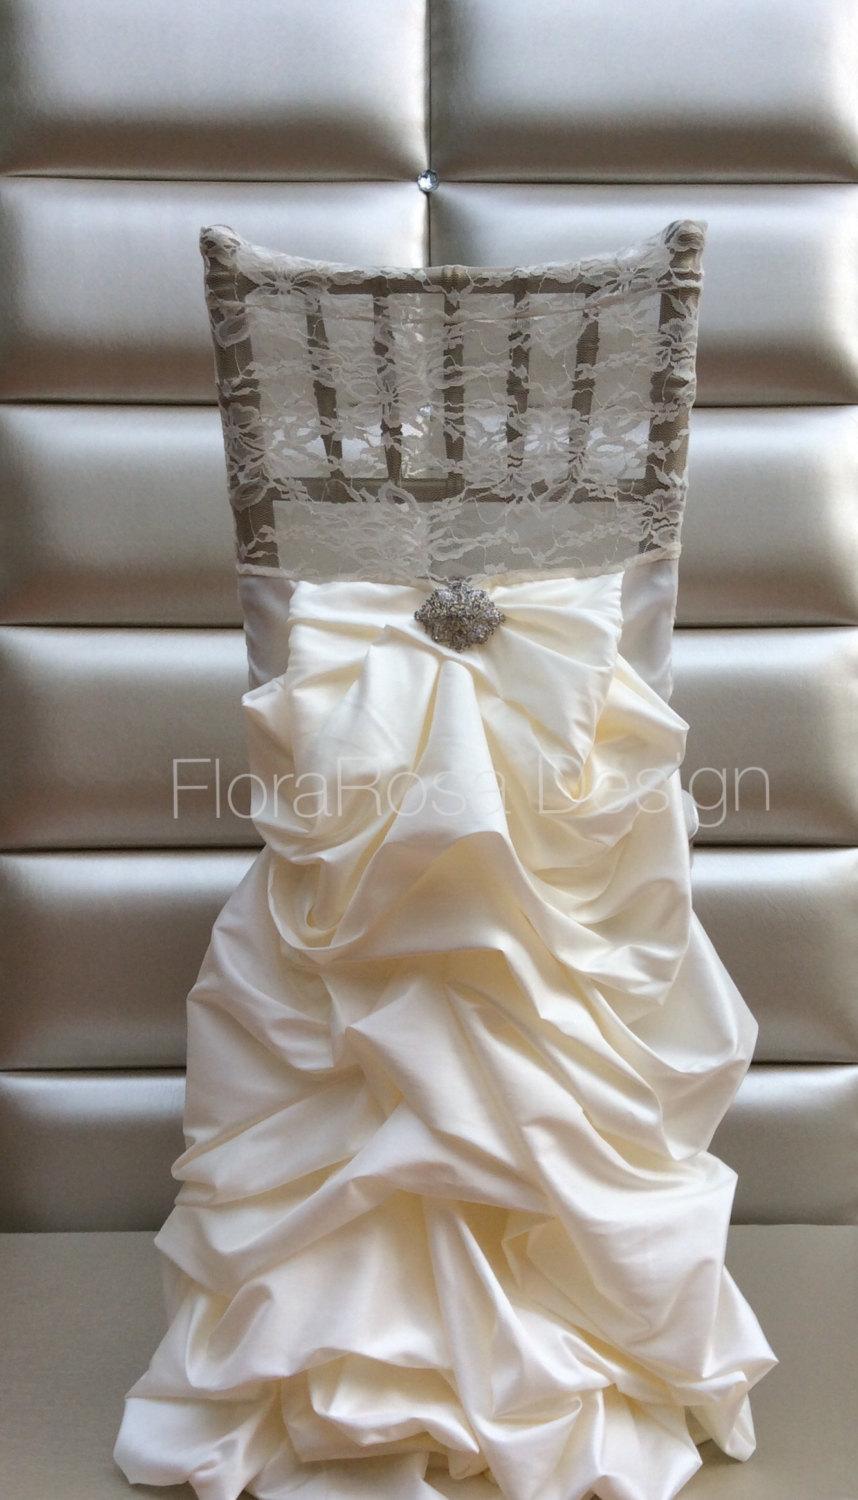 Hochzeit - ONLY TODAY!!! Half-price!Chair covers,wedding chair cover, chiavari chair cover, wedding decoration, unique ceremony decor,